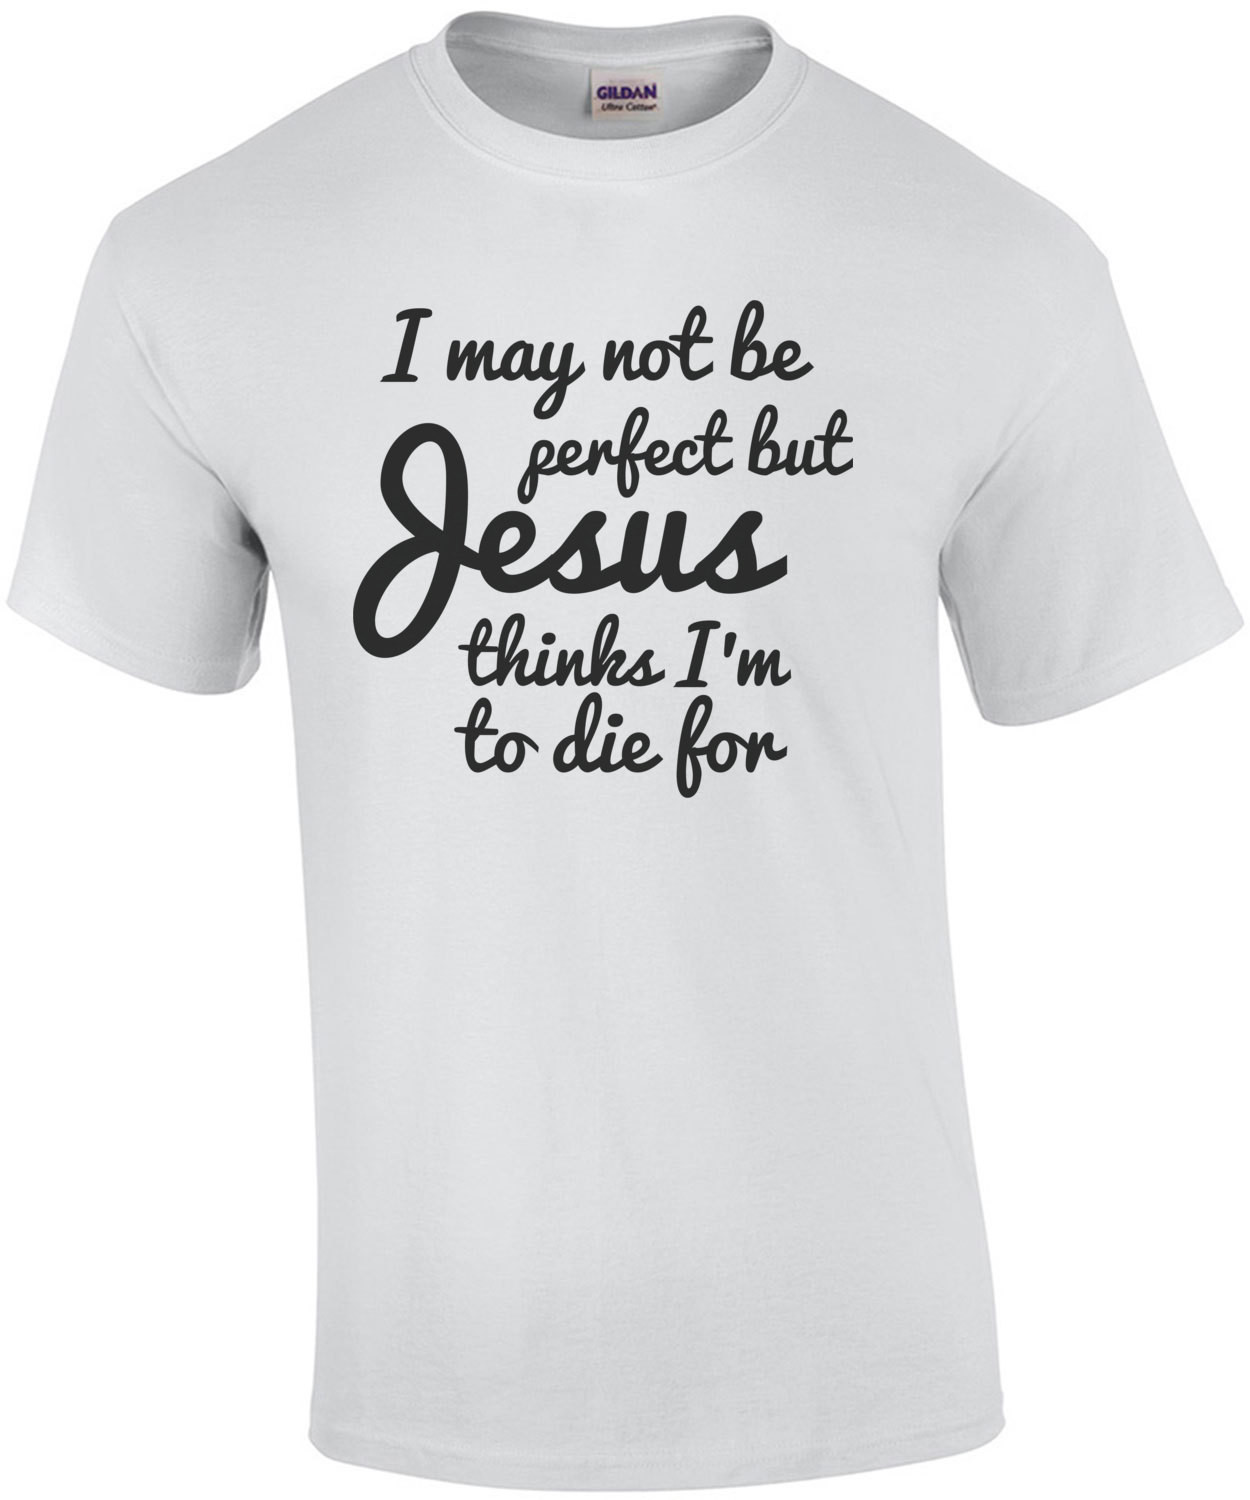 I may not be perfect but Jesus thinks im to die for - jesus t-shirt